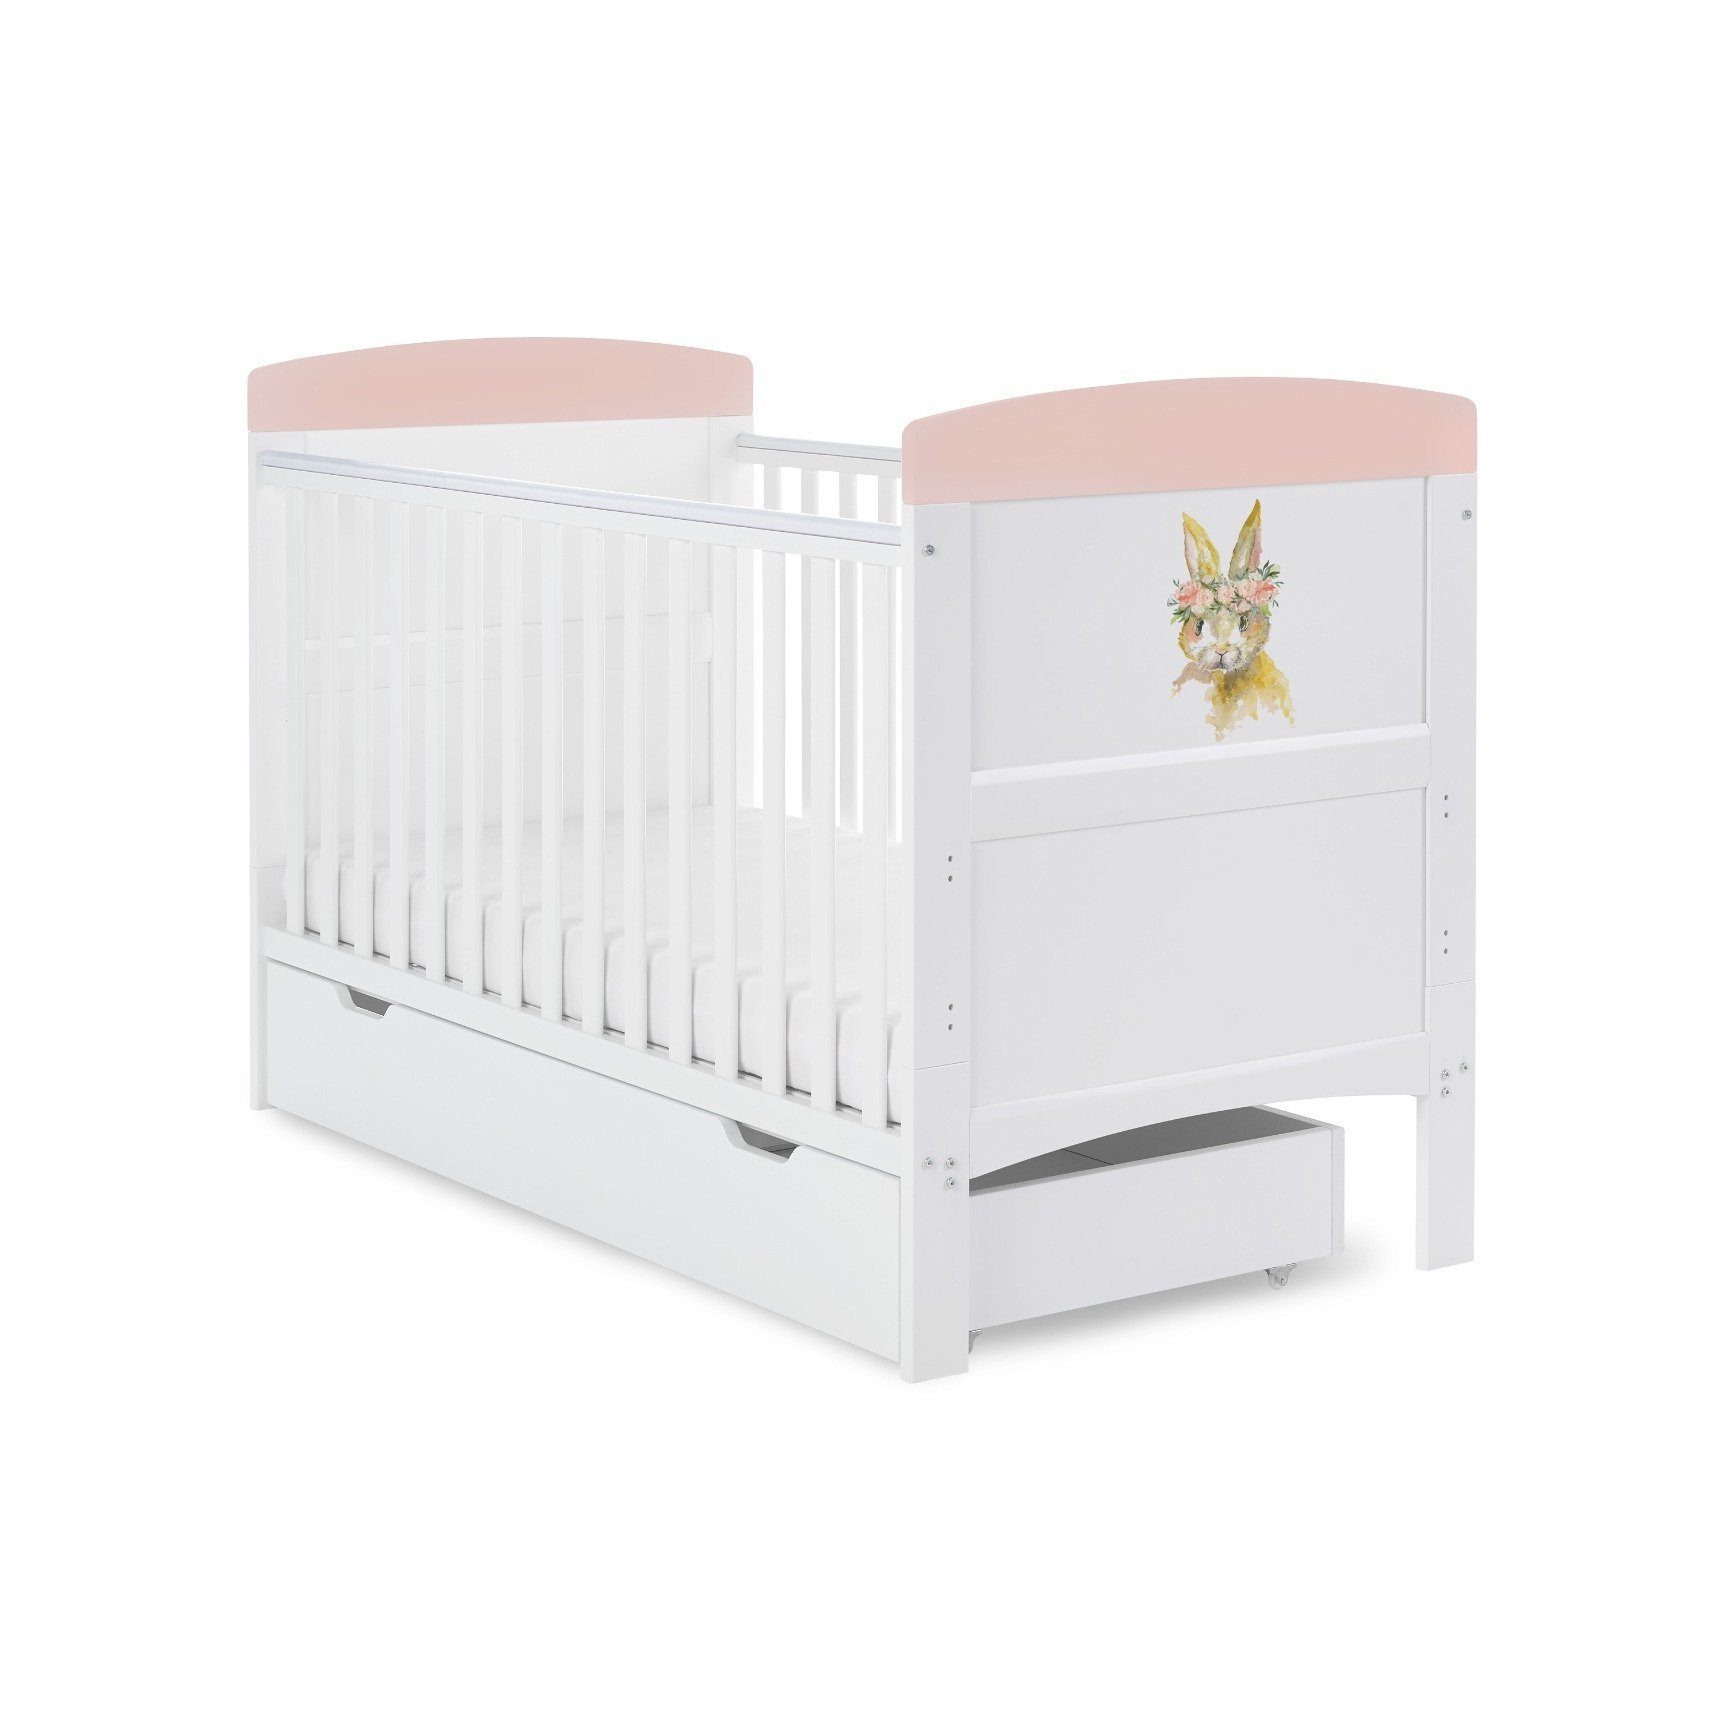 Obaby Grace Inspire Cot Bed & Under Drawer - Watercolour Rabbit Pink - image 1